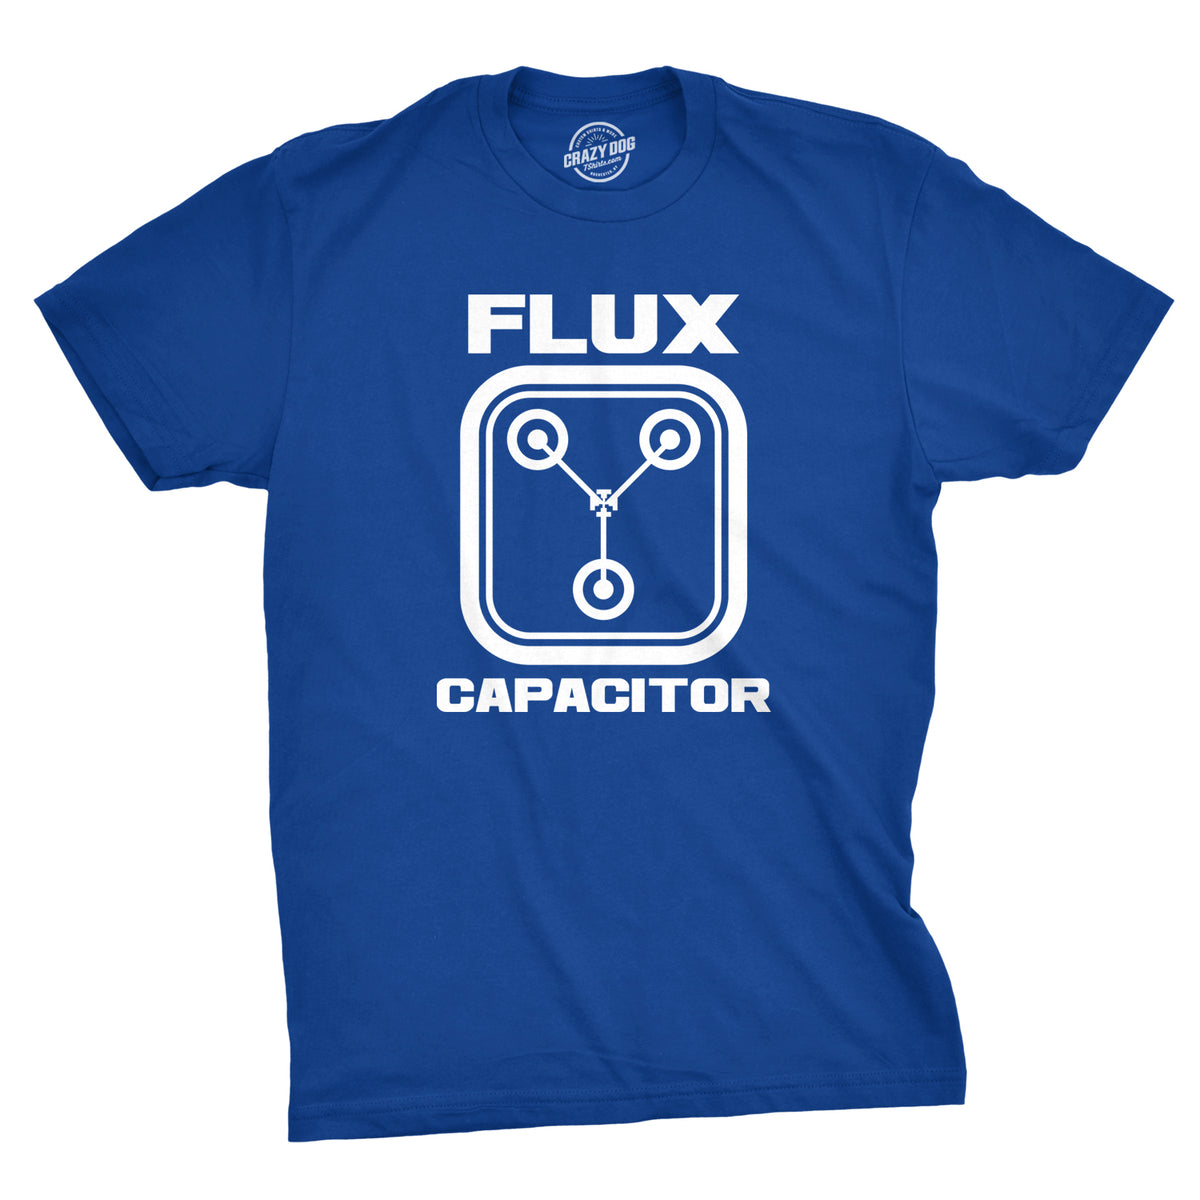 Funny Heather Royal - Flux Flux Capacitor Mens T Shirt Nerdy TV &amp; Movies Retro Tee